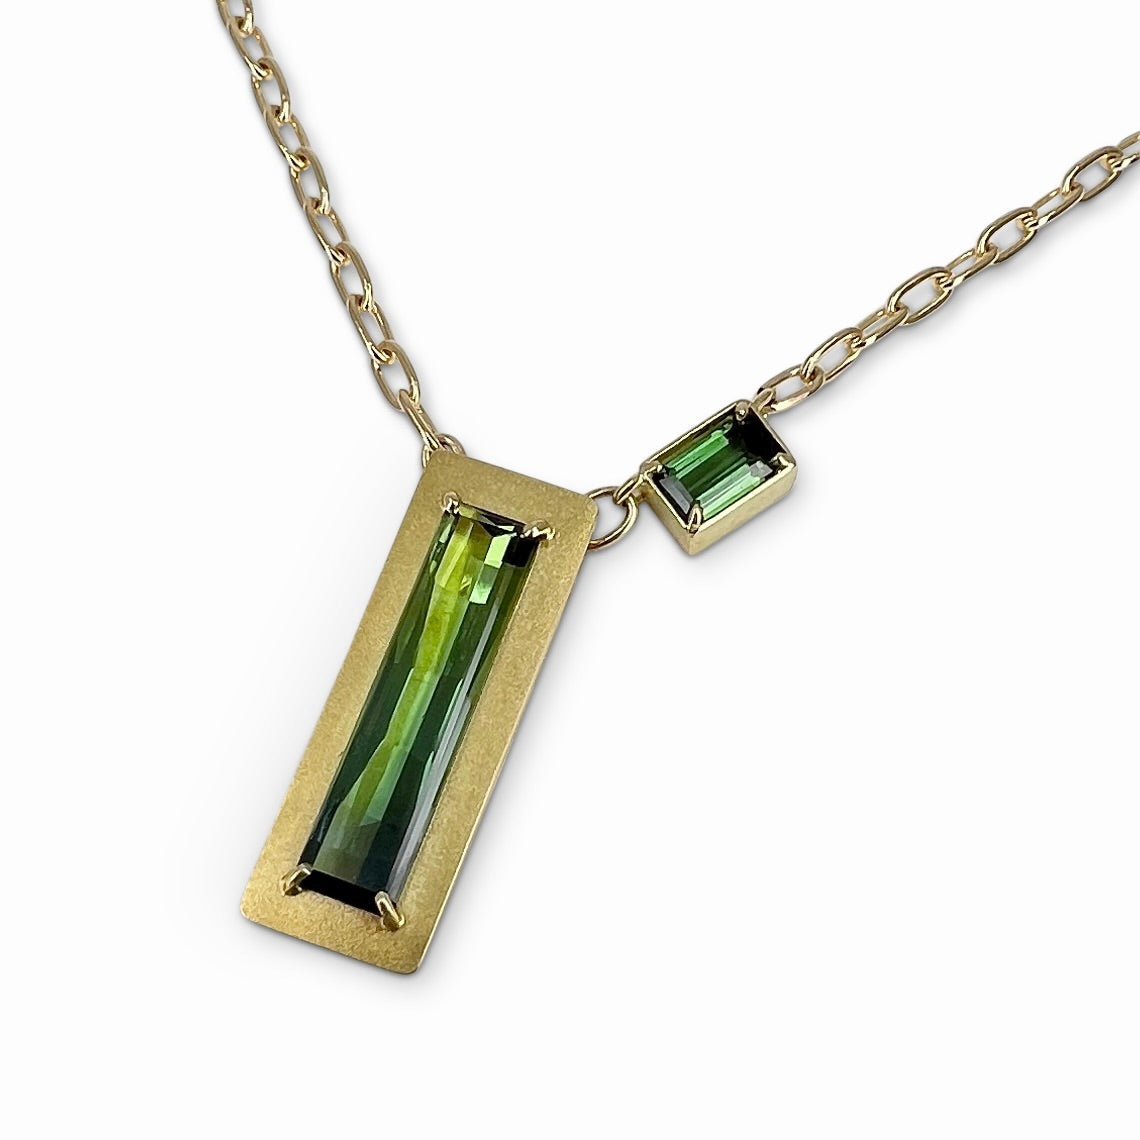 necklace with  rectangular cut green tourmalines in 18K yellow gold with 14K yellow gold chain by Ayesha Mayadas